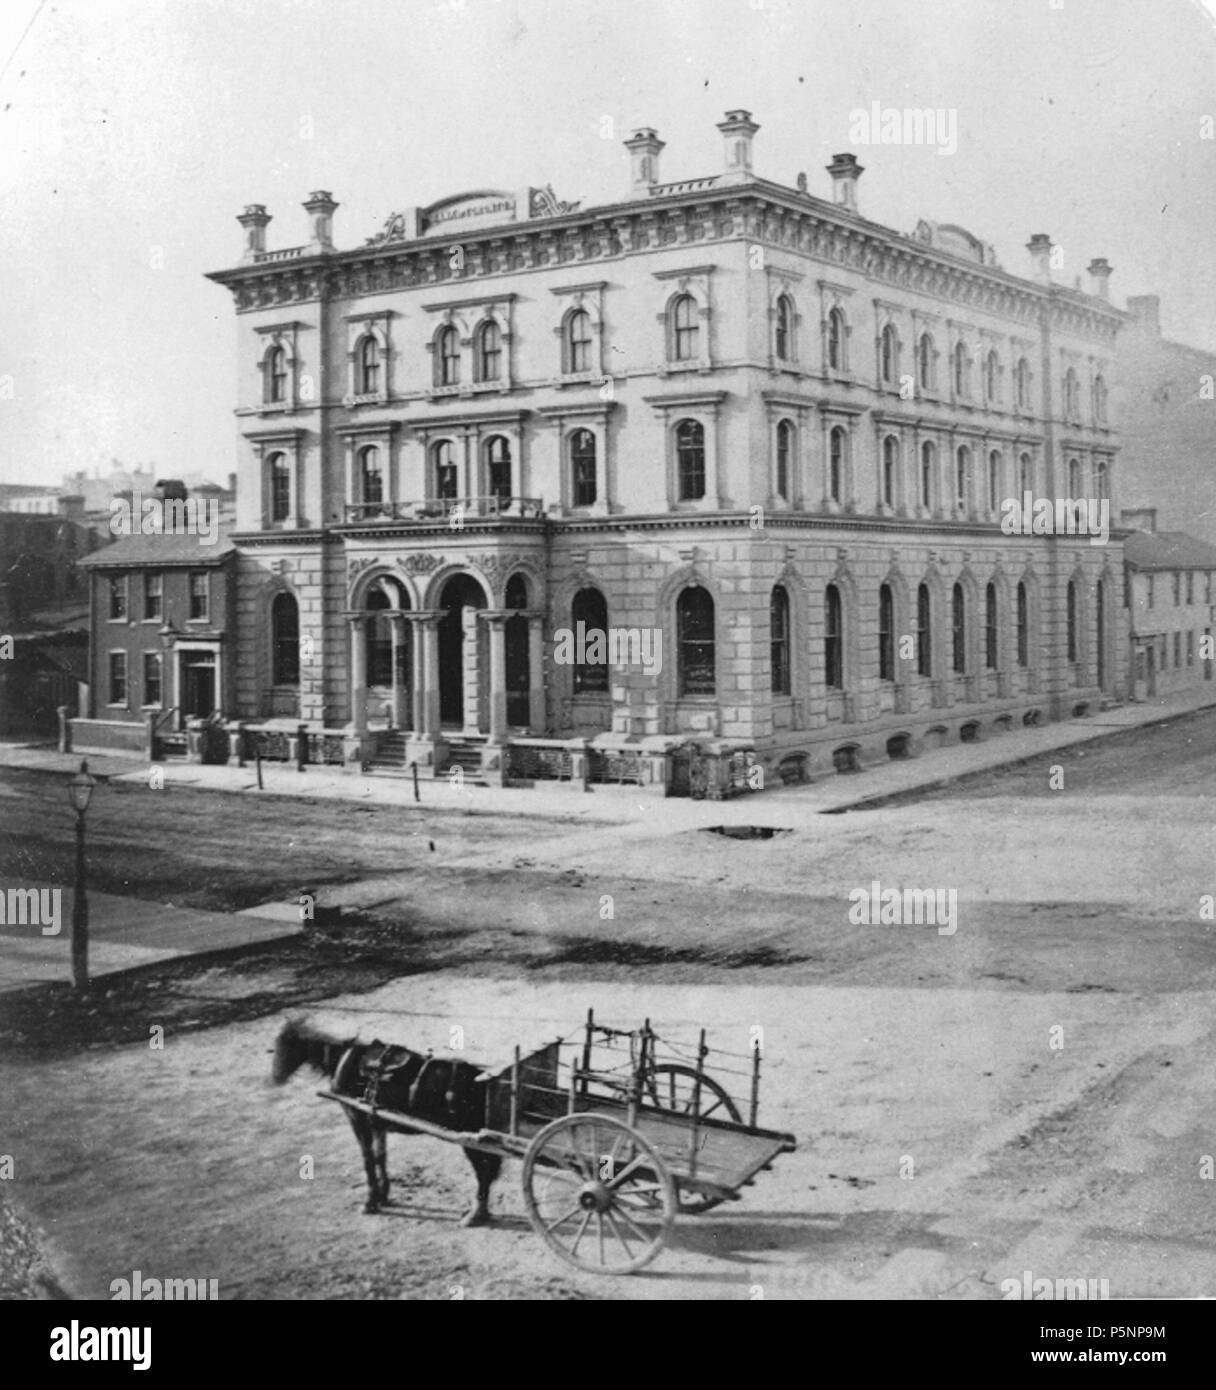 N/A. English: Bank of Toronto, northwest corner of Church and Wellington Streets, Toronto, Canada. 1868.   William Notman  (1826–1891)     Alternative names William McFarlane Notman  Description Canadian photographer and businessperson  Date of birth/death 8 March 1826 25 November 1891  Location of birth/death Paisley, Scotland Montreal, Quebec, Canada  Work location Montreal, Quebec, Canada  Authority control  : Q3495973 VIAF:66769327 ISNI:0000 0000 7370 7964 ULAN:500023579 LCCN:n85325240 Open Library:OL5301228A WorldCat 168 Bank of Toronto 1868 Stock Photo